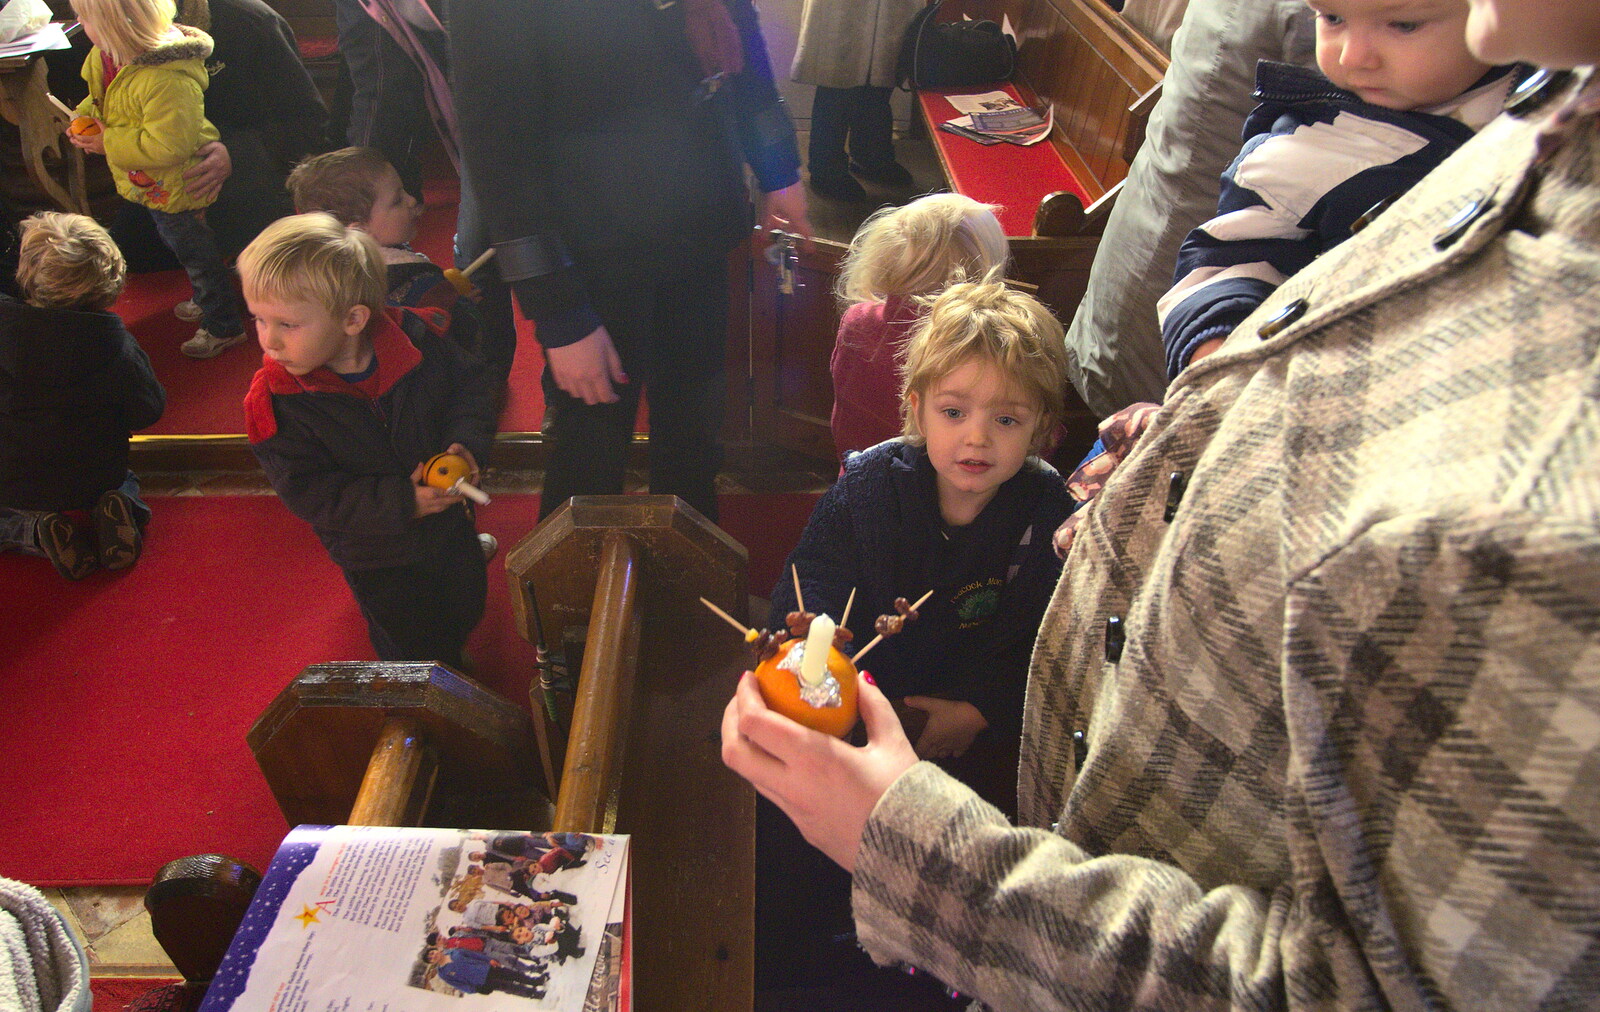 Isobel inspects the orange curiosity from Fred's Nursery Nativity, Palgrave, Suffolk - 13th December 2012